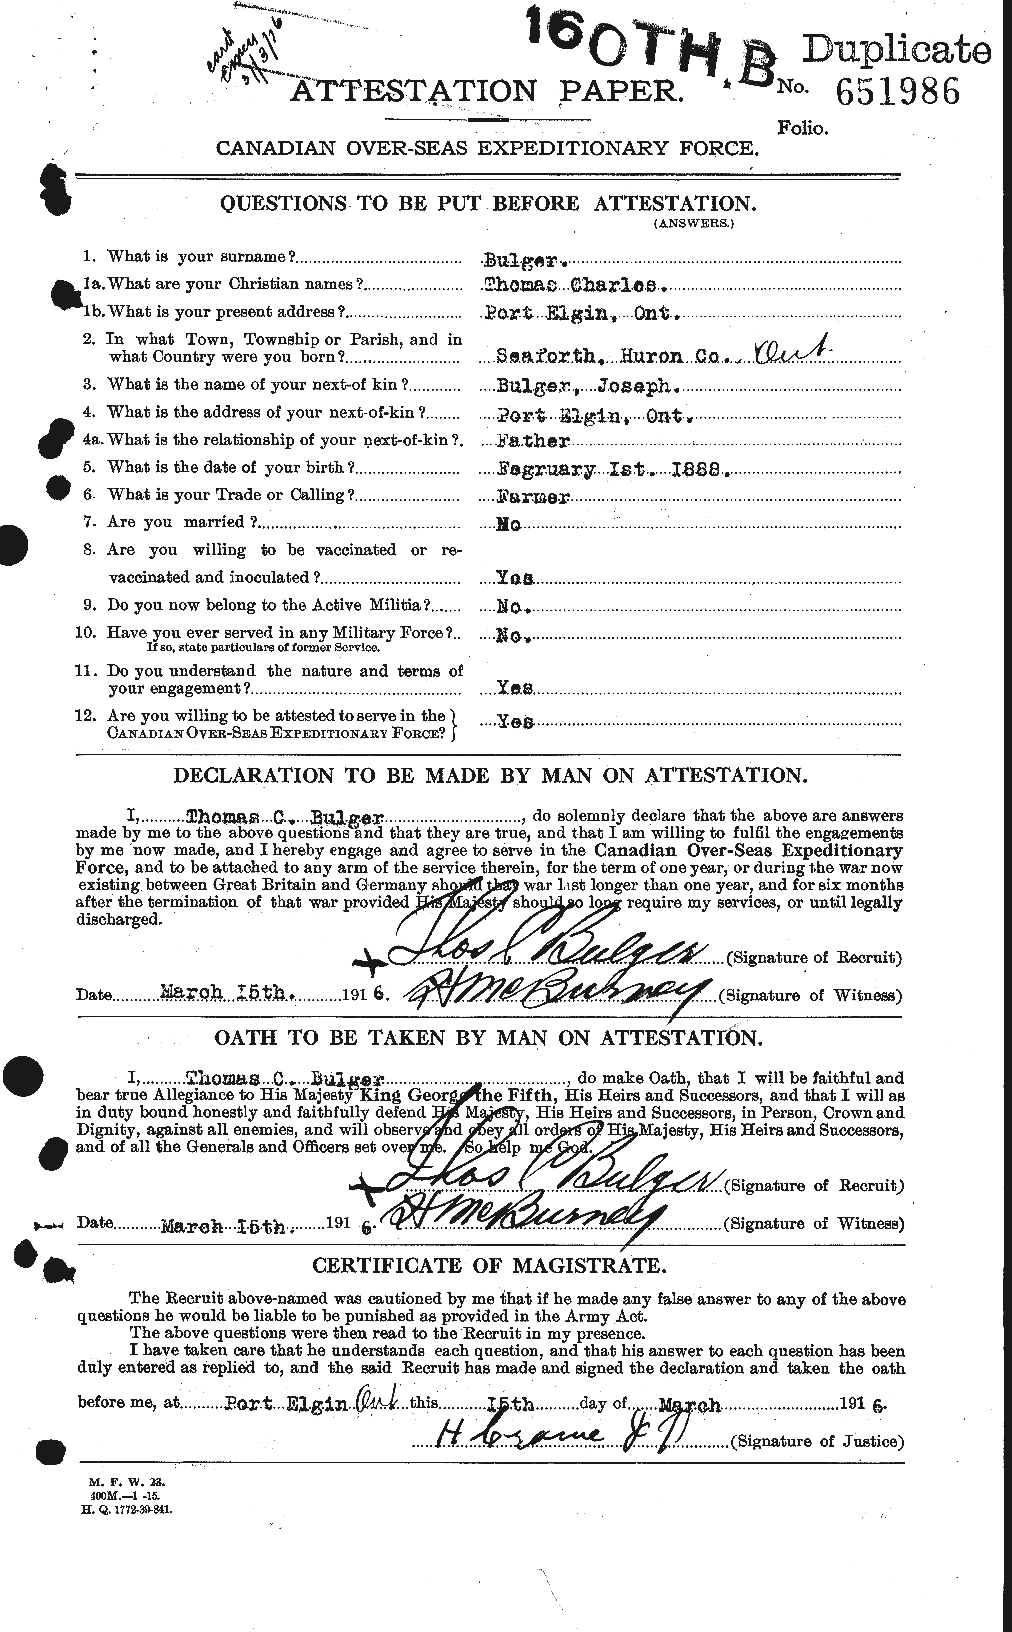 Personnel Records of the First World War - CEF 270638a